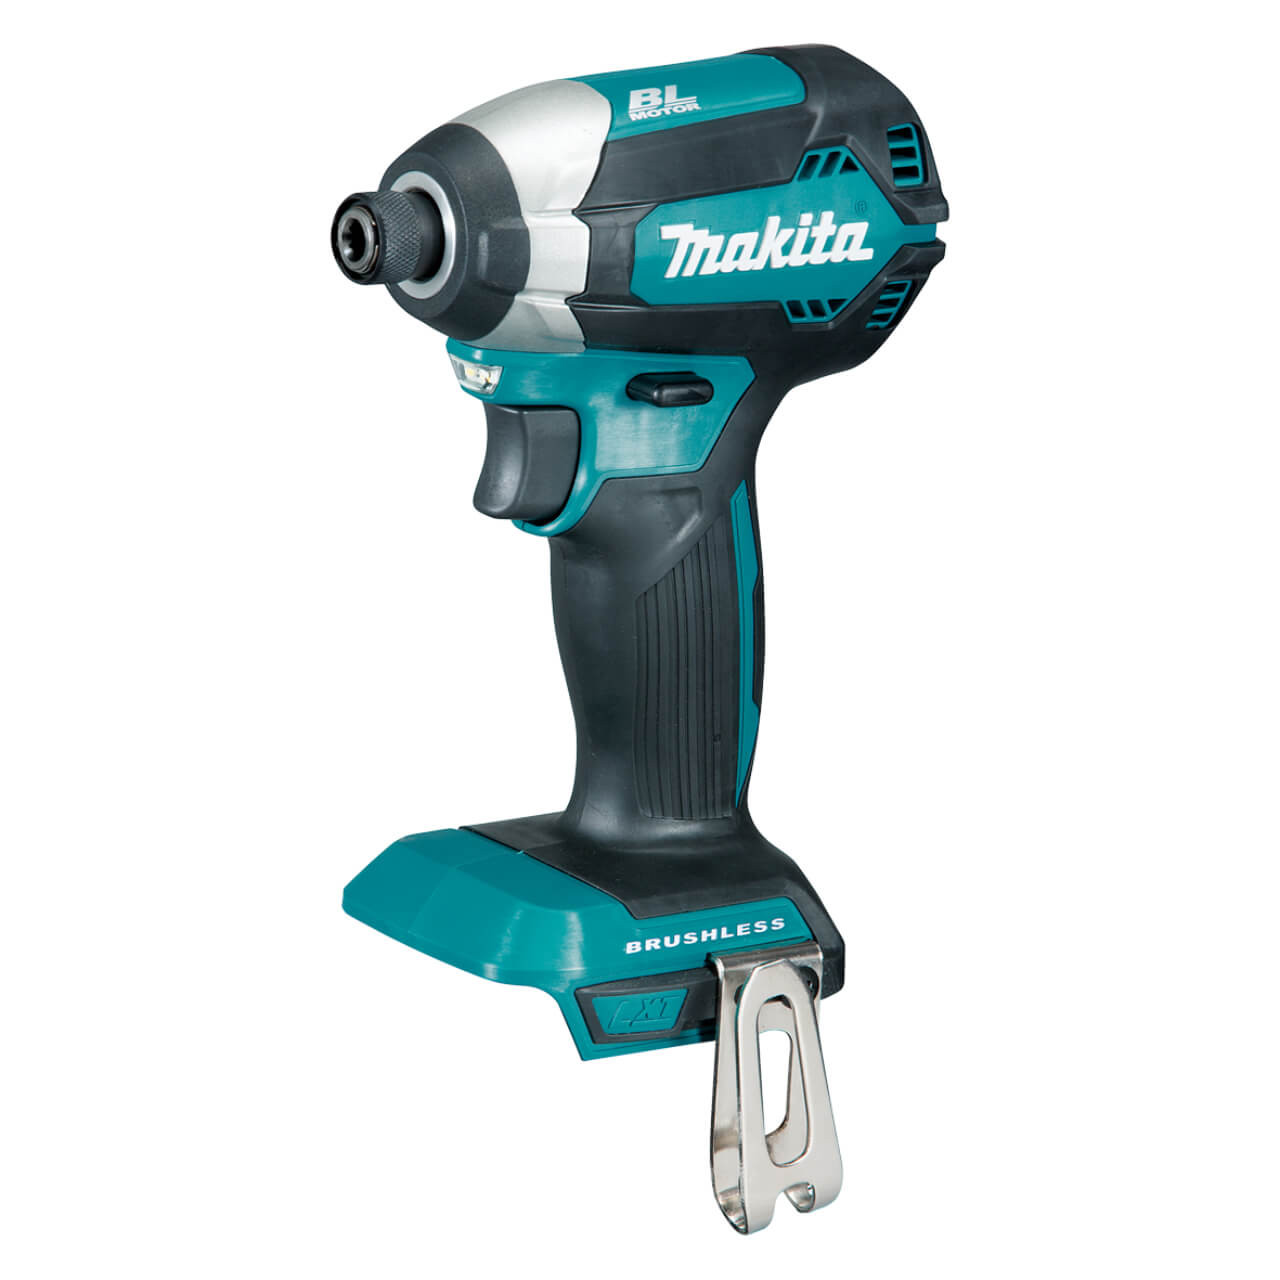 Makita 18V COMPACT BRUSHLESS Impact Driver Kit - Includes 2 x 5.0Ah Batteries. Rapid Charger & Carry Case